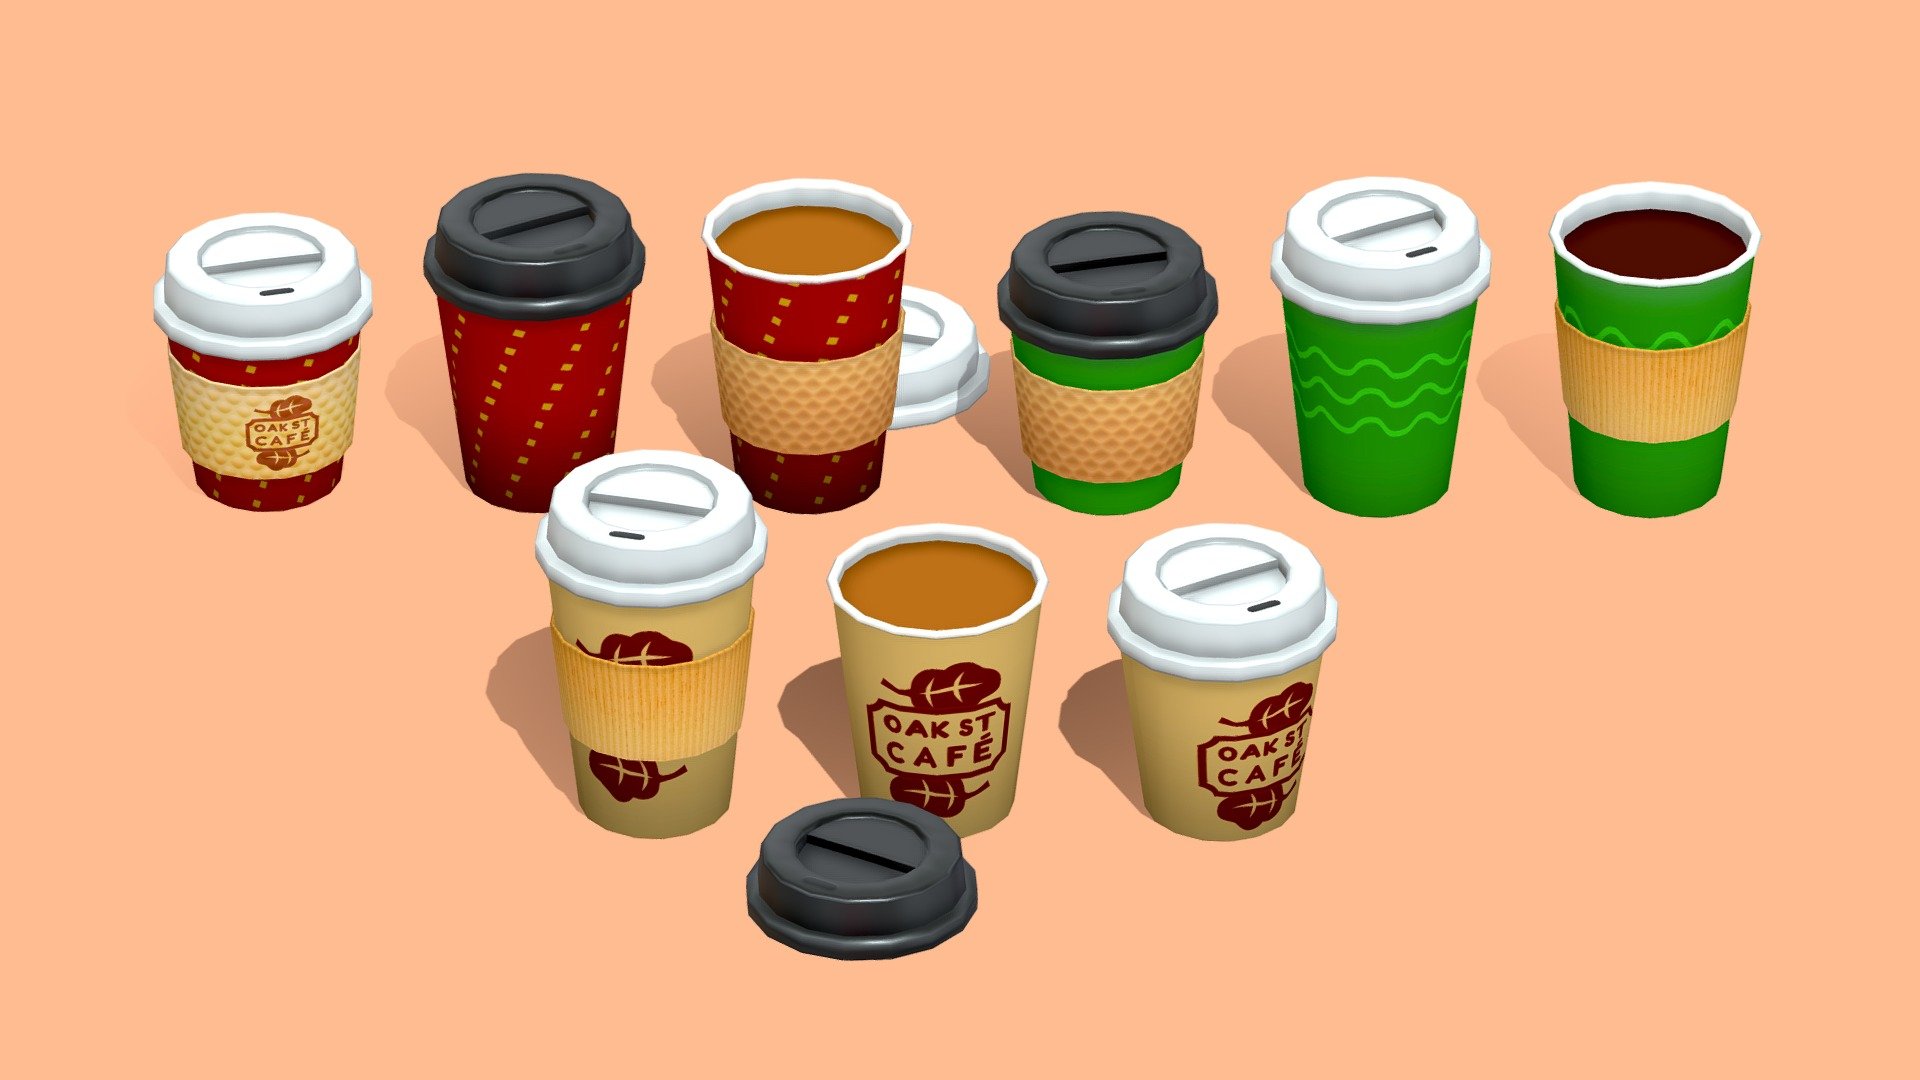 Would you like a small, medium or large?




Three different cup sizes and styles, three unique java jackets and two types of lids to choose from

1024x1024 diffuse textures, can be lit or unlit

Modular, low-poly and customizable 

Handpainted in Photoshop and modeled in Maya

Make sure to check out my other assets! Every asset is modeled and painted in the same style so your game or project will maintain a cohesive and unique style with a wide variety of assets to choose from! - Takeout Coffee - Buy Royalty Free 3D model by Megan Alcock (@citystreetlight) 3d model